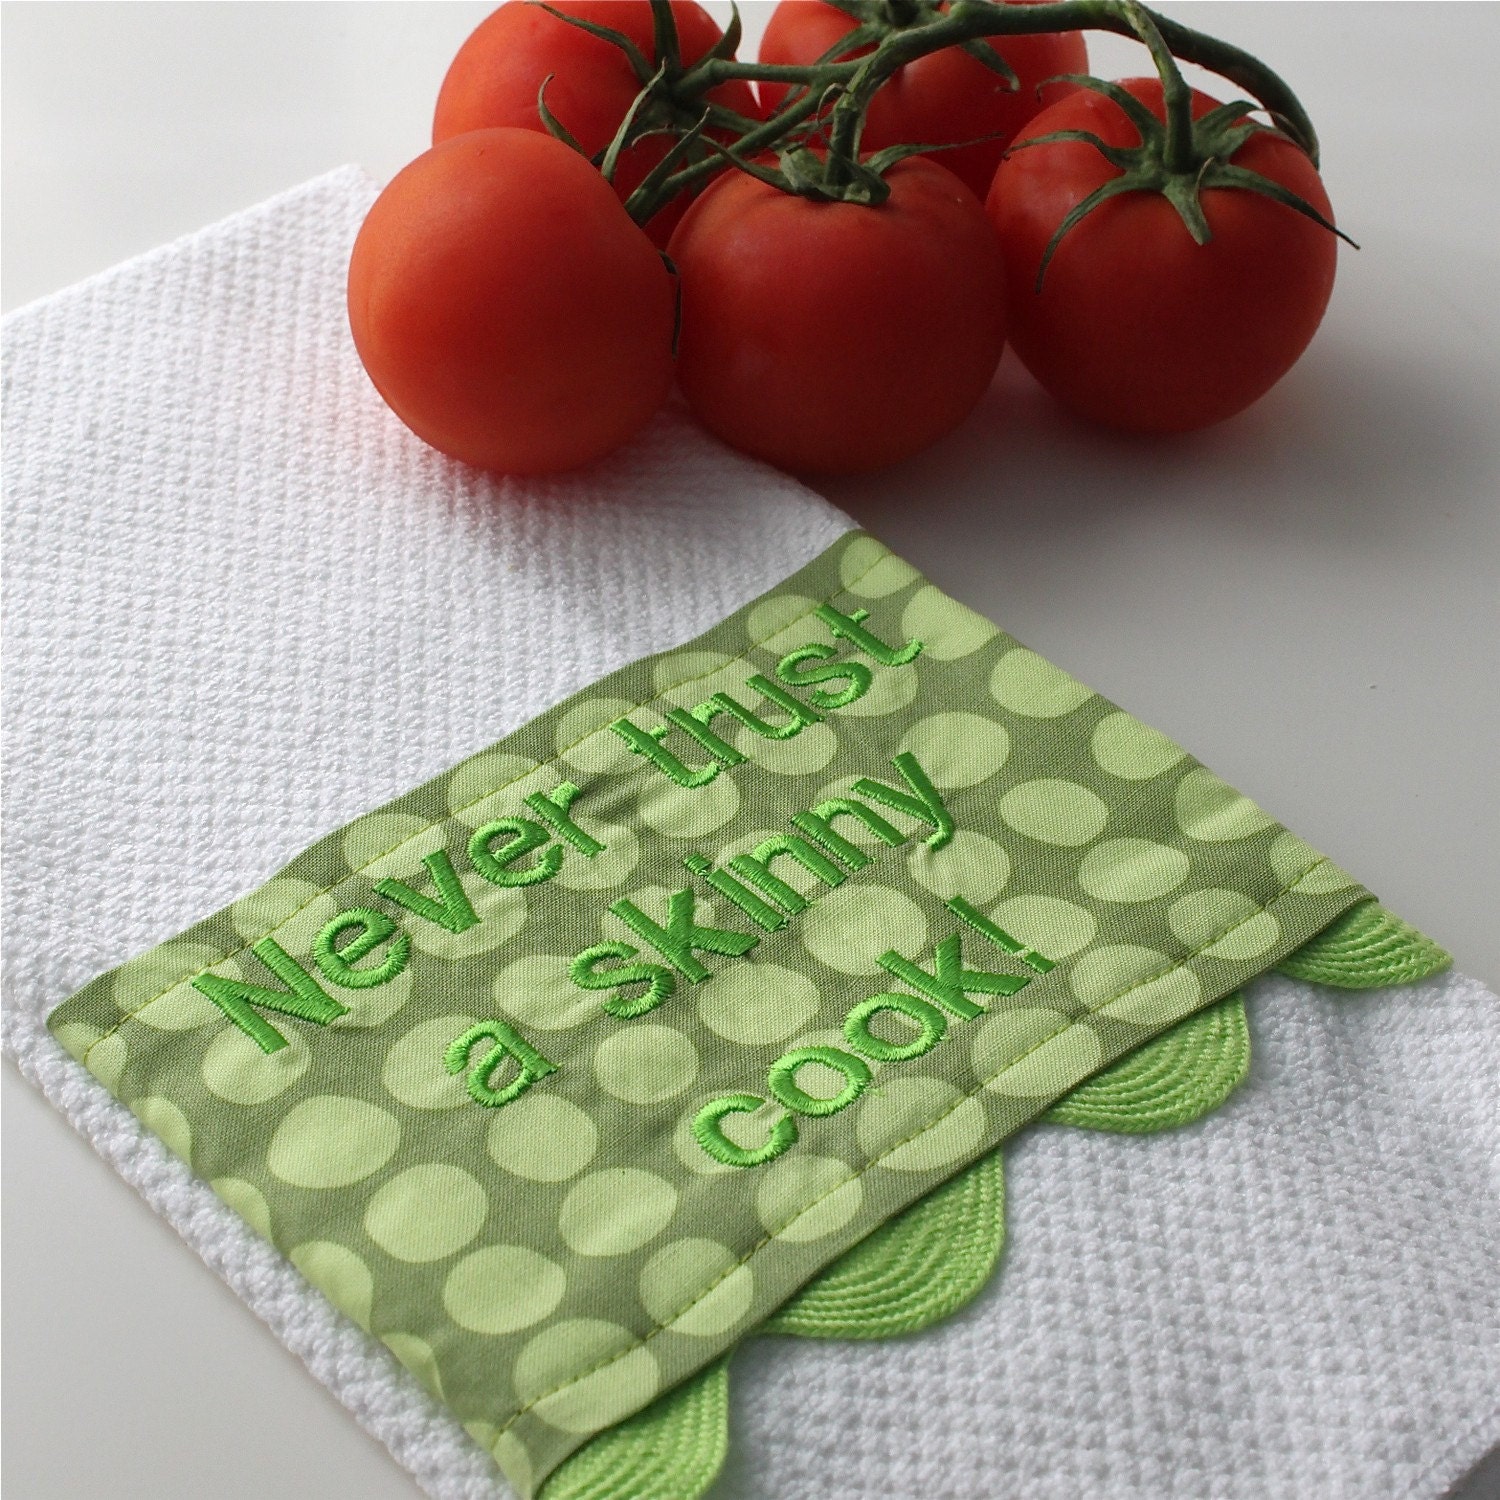 Kitchen Towel with Amy Butler Fabric and Embroidery "Never Trust a Skinny Cook"